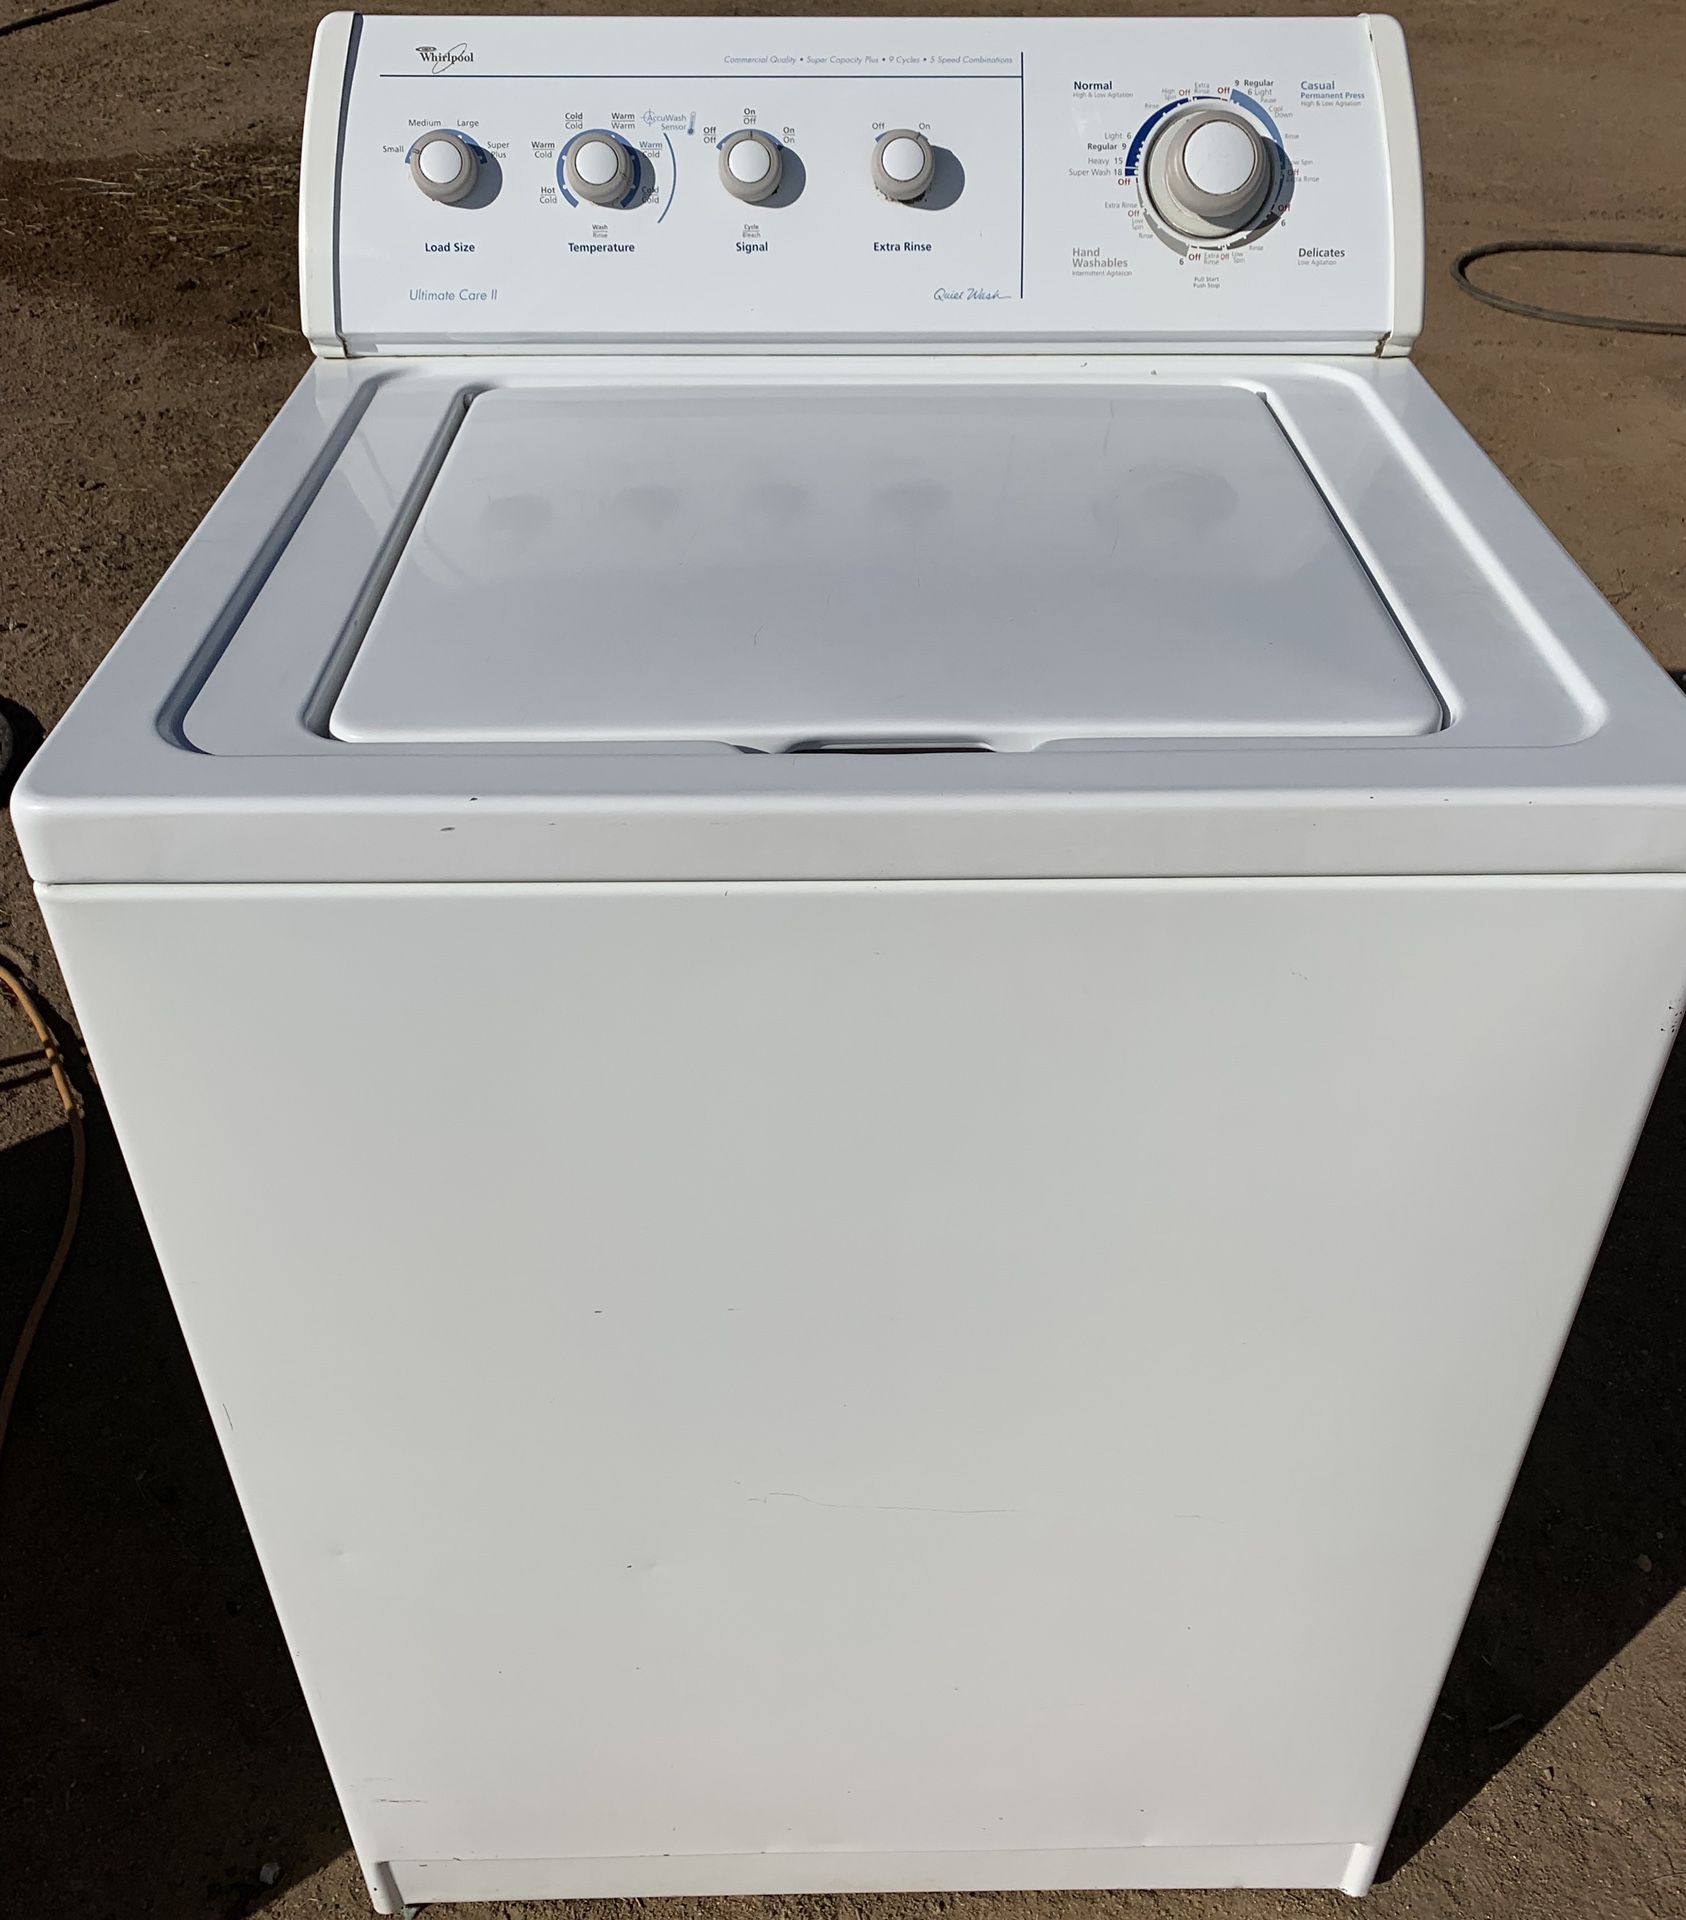 Whirlpool washer in good working condition 60 days warranty